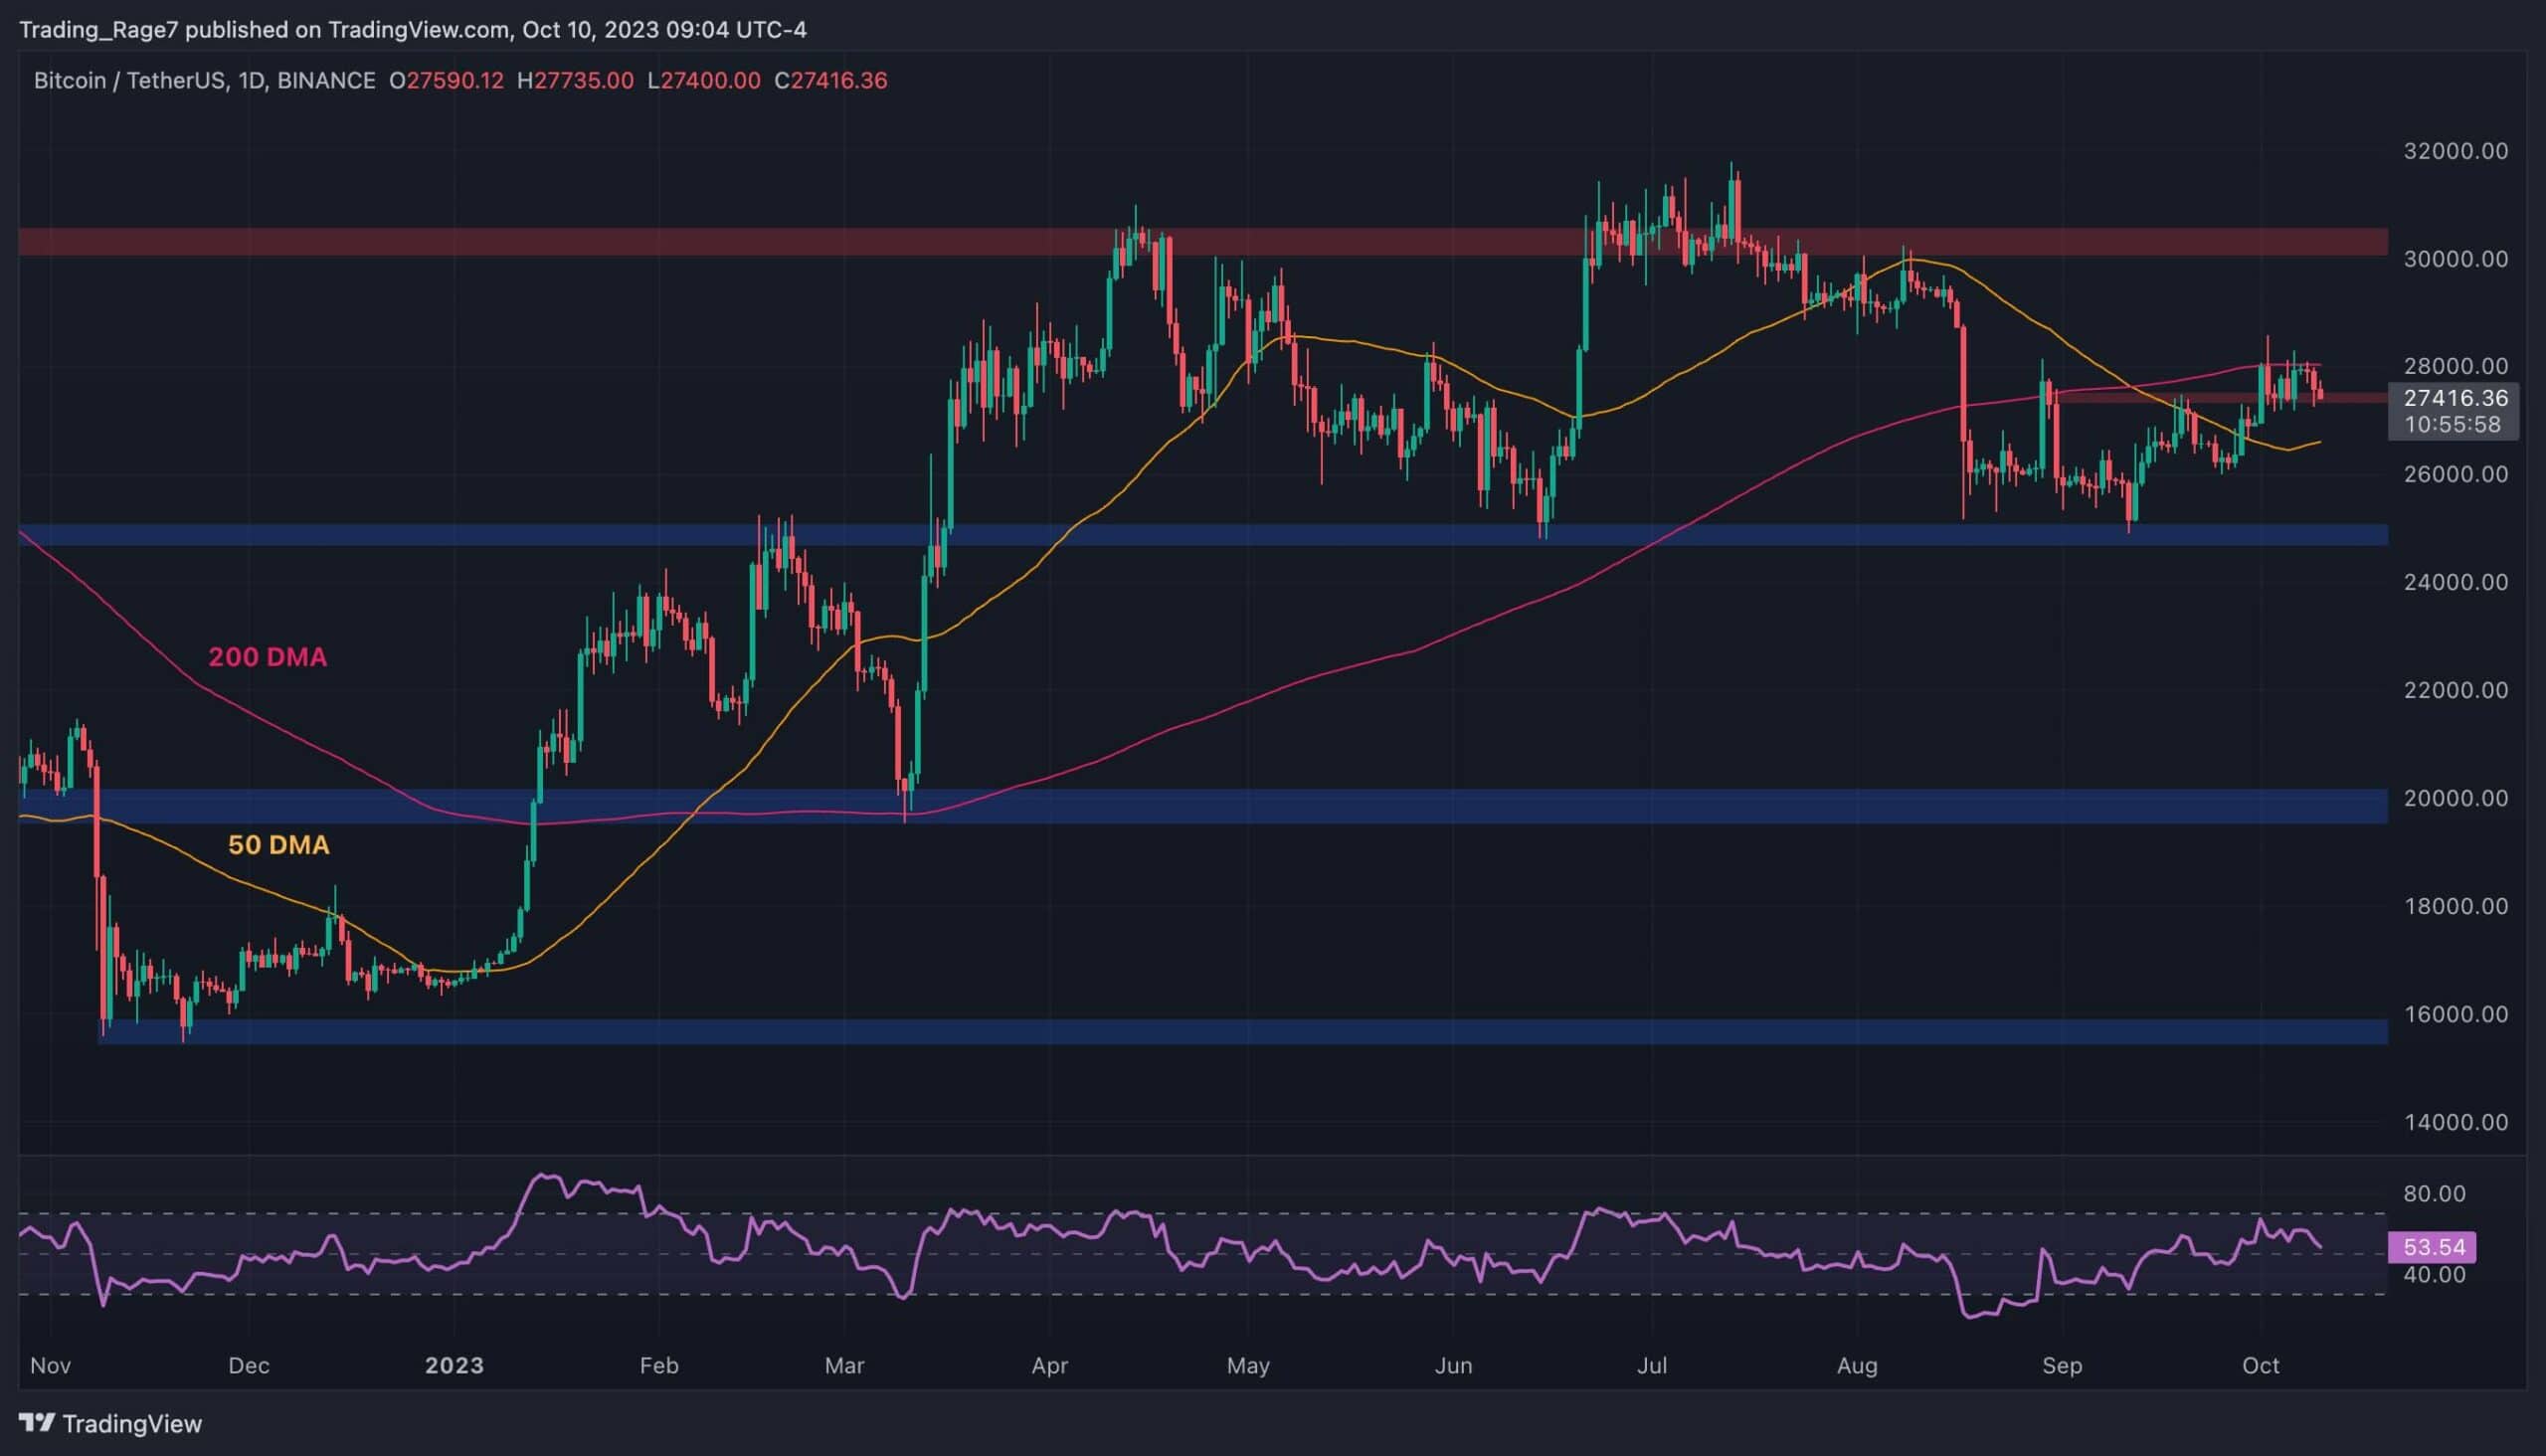 This Is Bitcoin’s First Line of Support if the Bears Prevail (BTC Price Analysis)